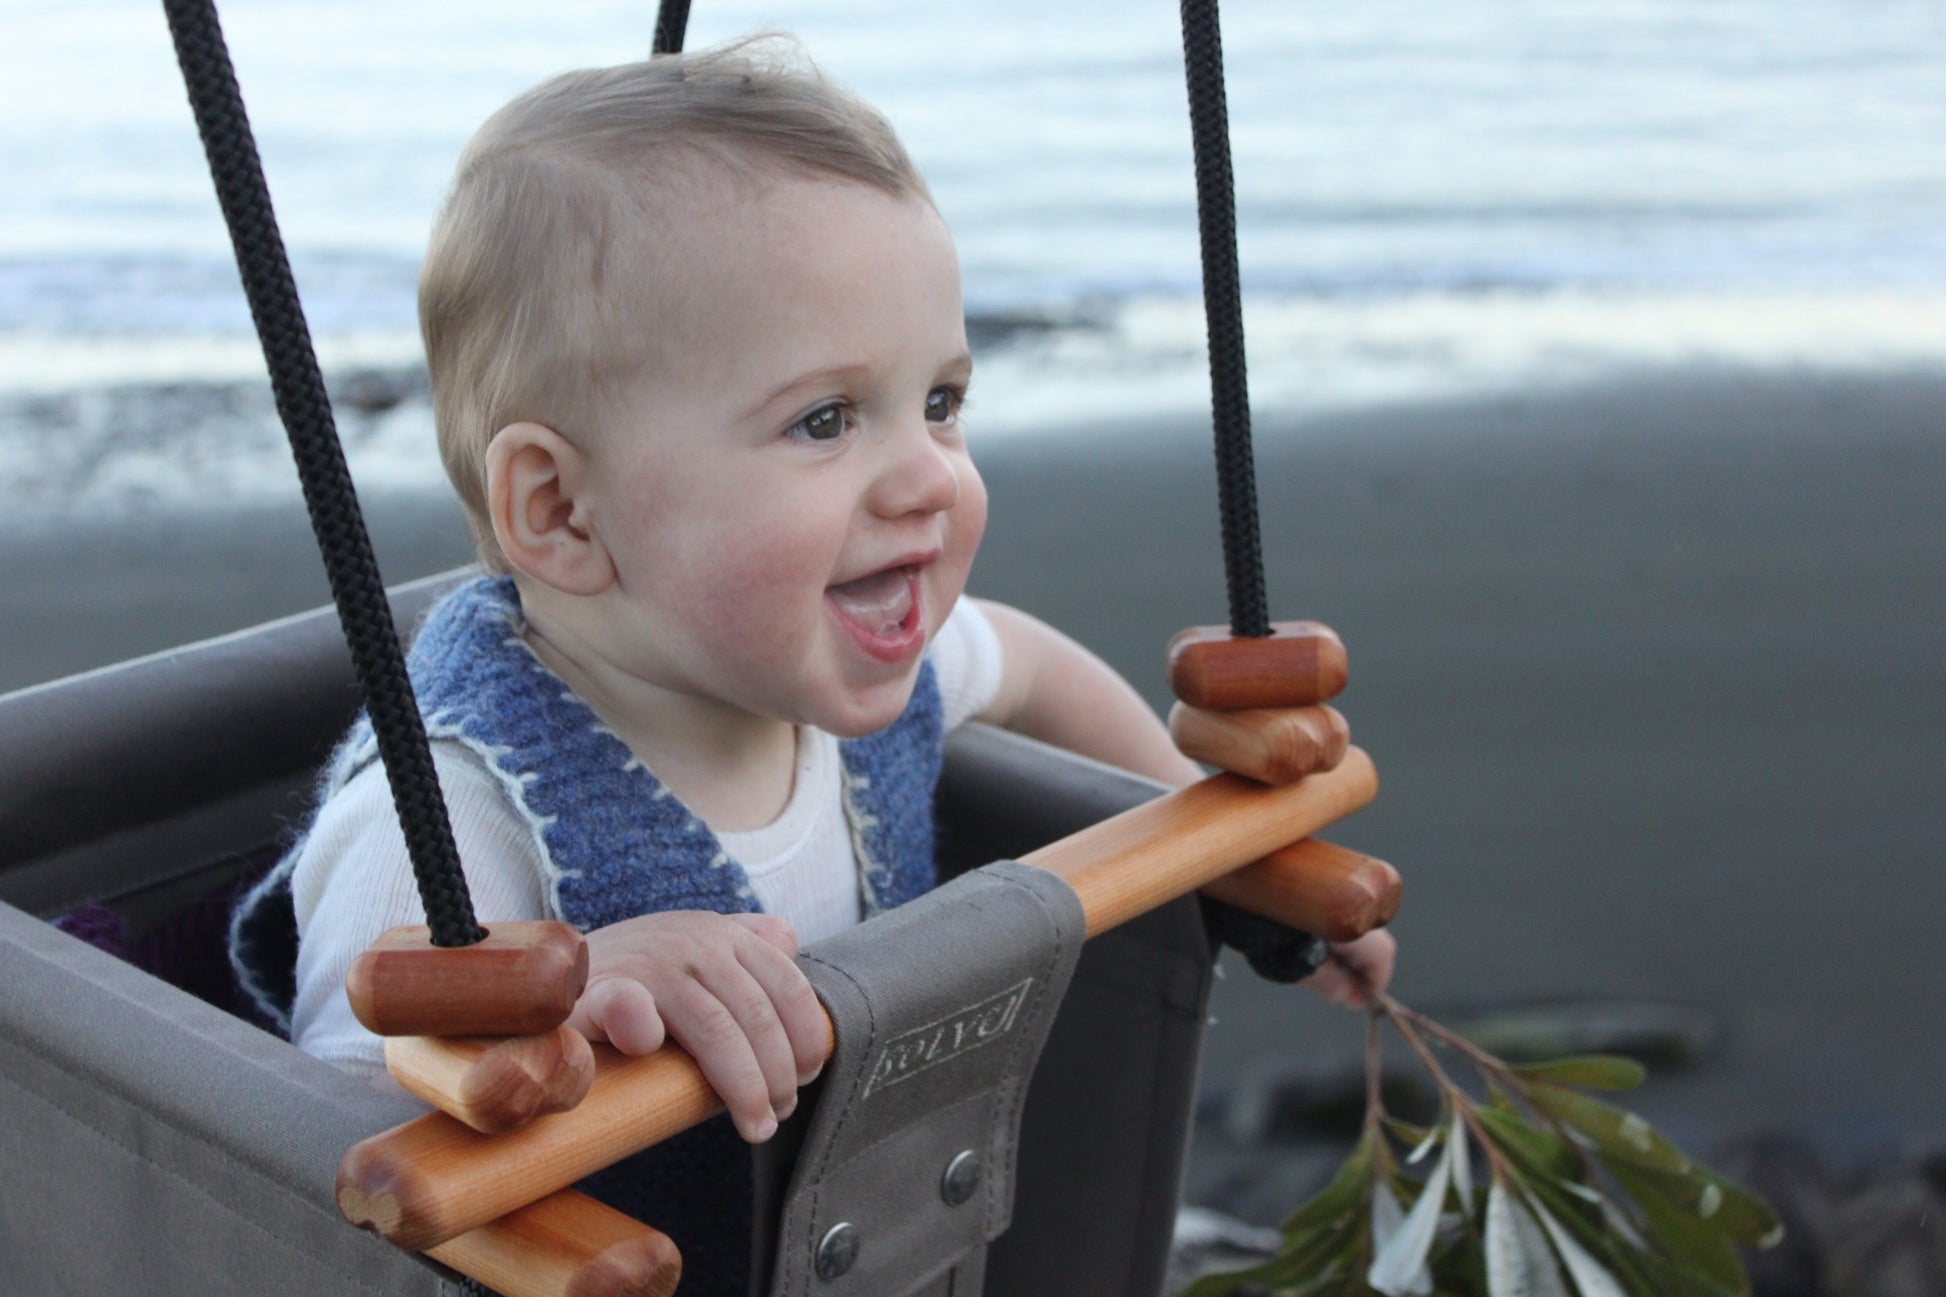 2in1 kids swings, safe sensory baby swing indoors made from fabric and wood